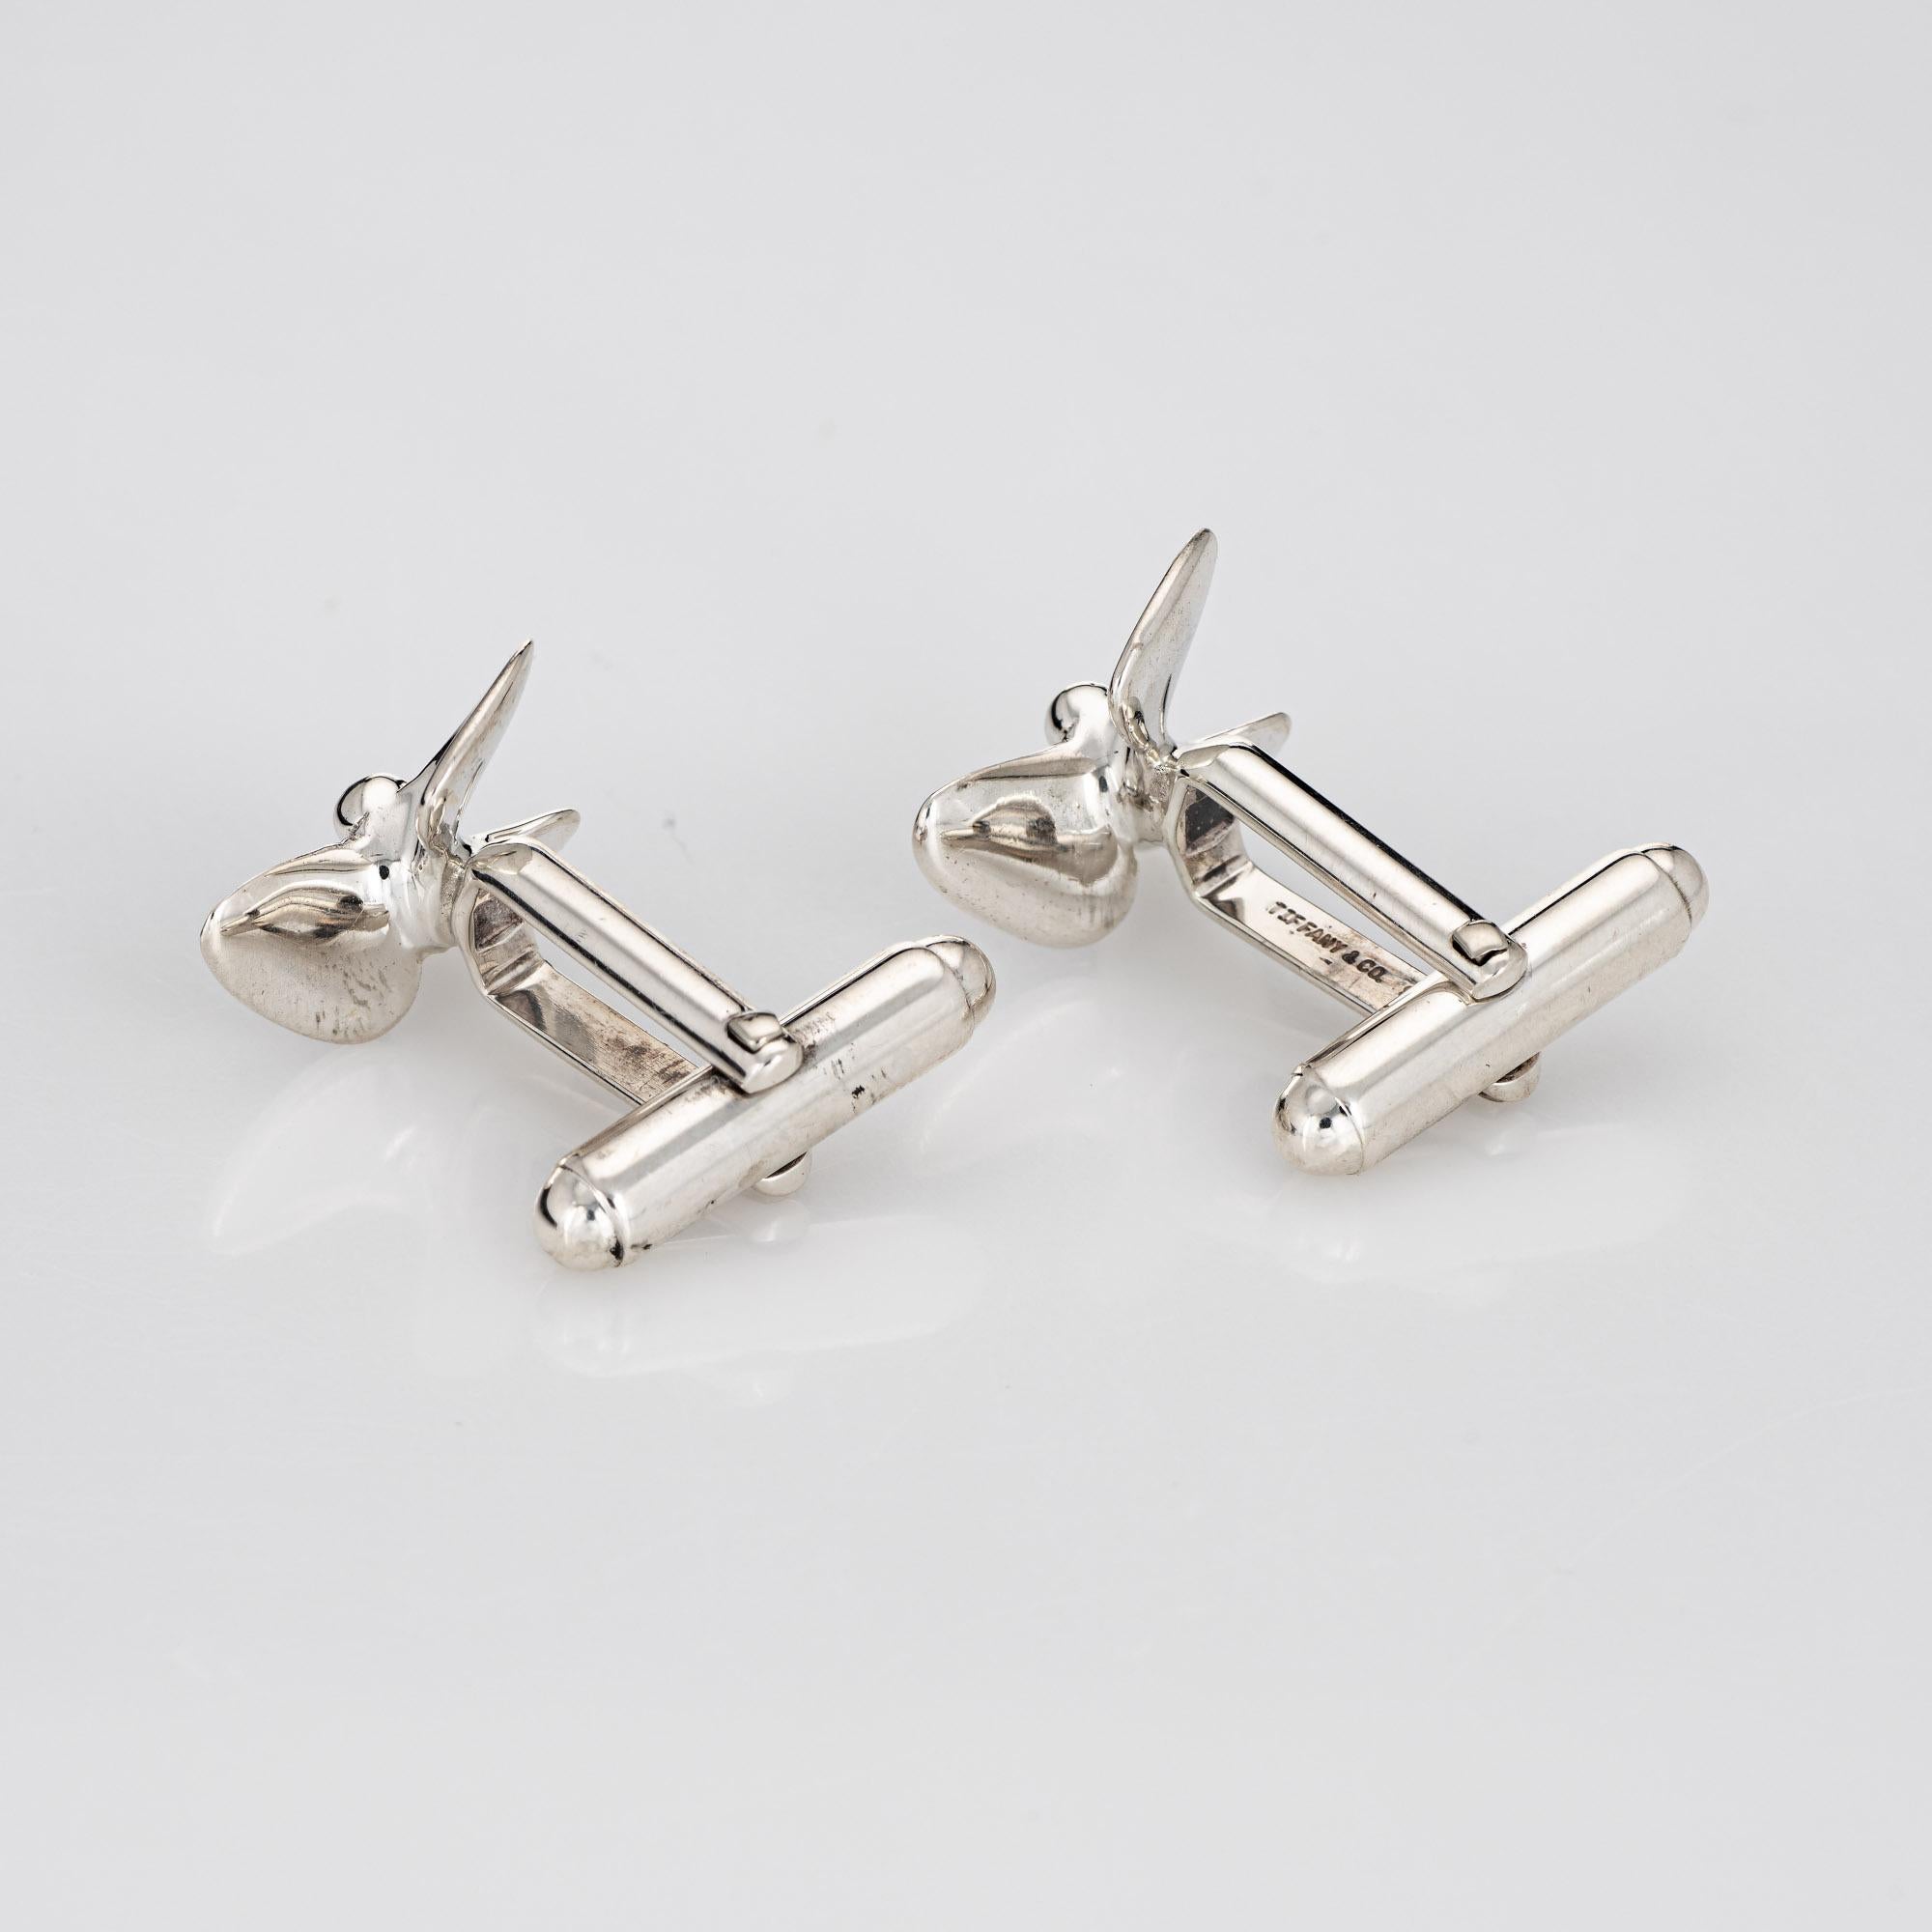 Finely detailed vintage Tiffany & Co boat propeller cufflinks crafted in sterling silver (circa 1990s). 

The cufflinks are crafted in the form of boat propellers, a great gift idea for the lover of all things nautical. 

The cufflinks are in very